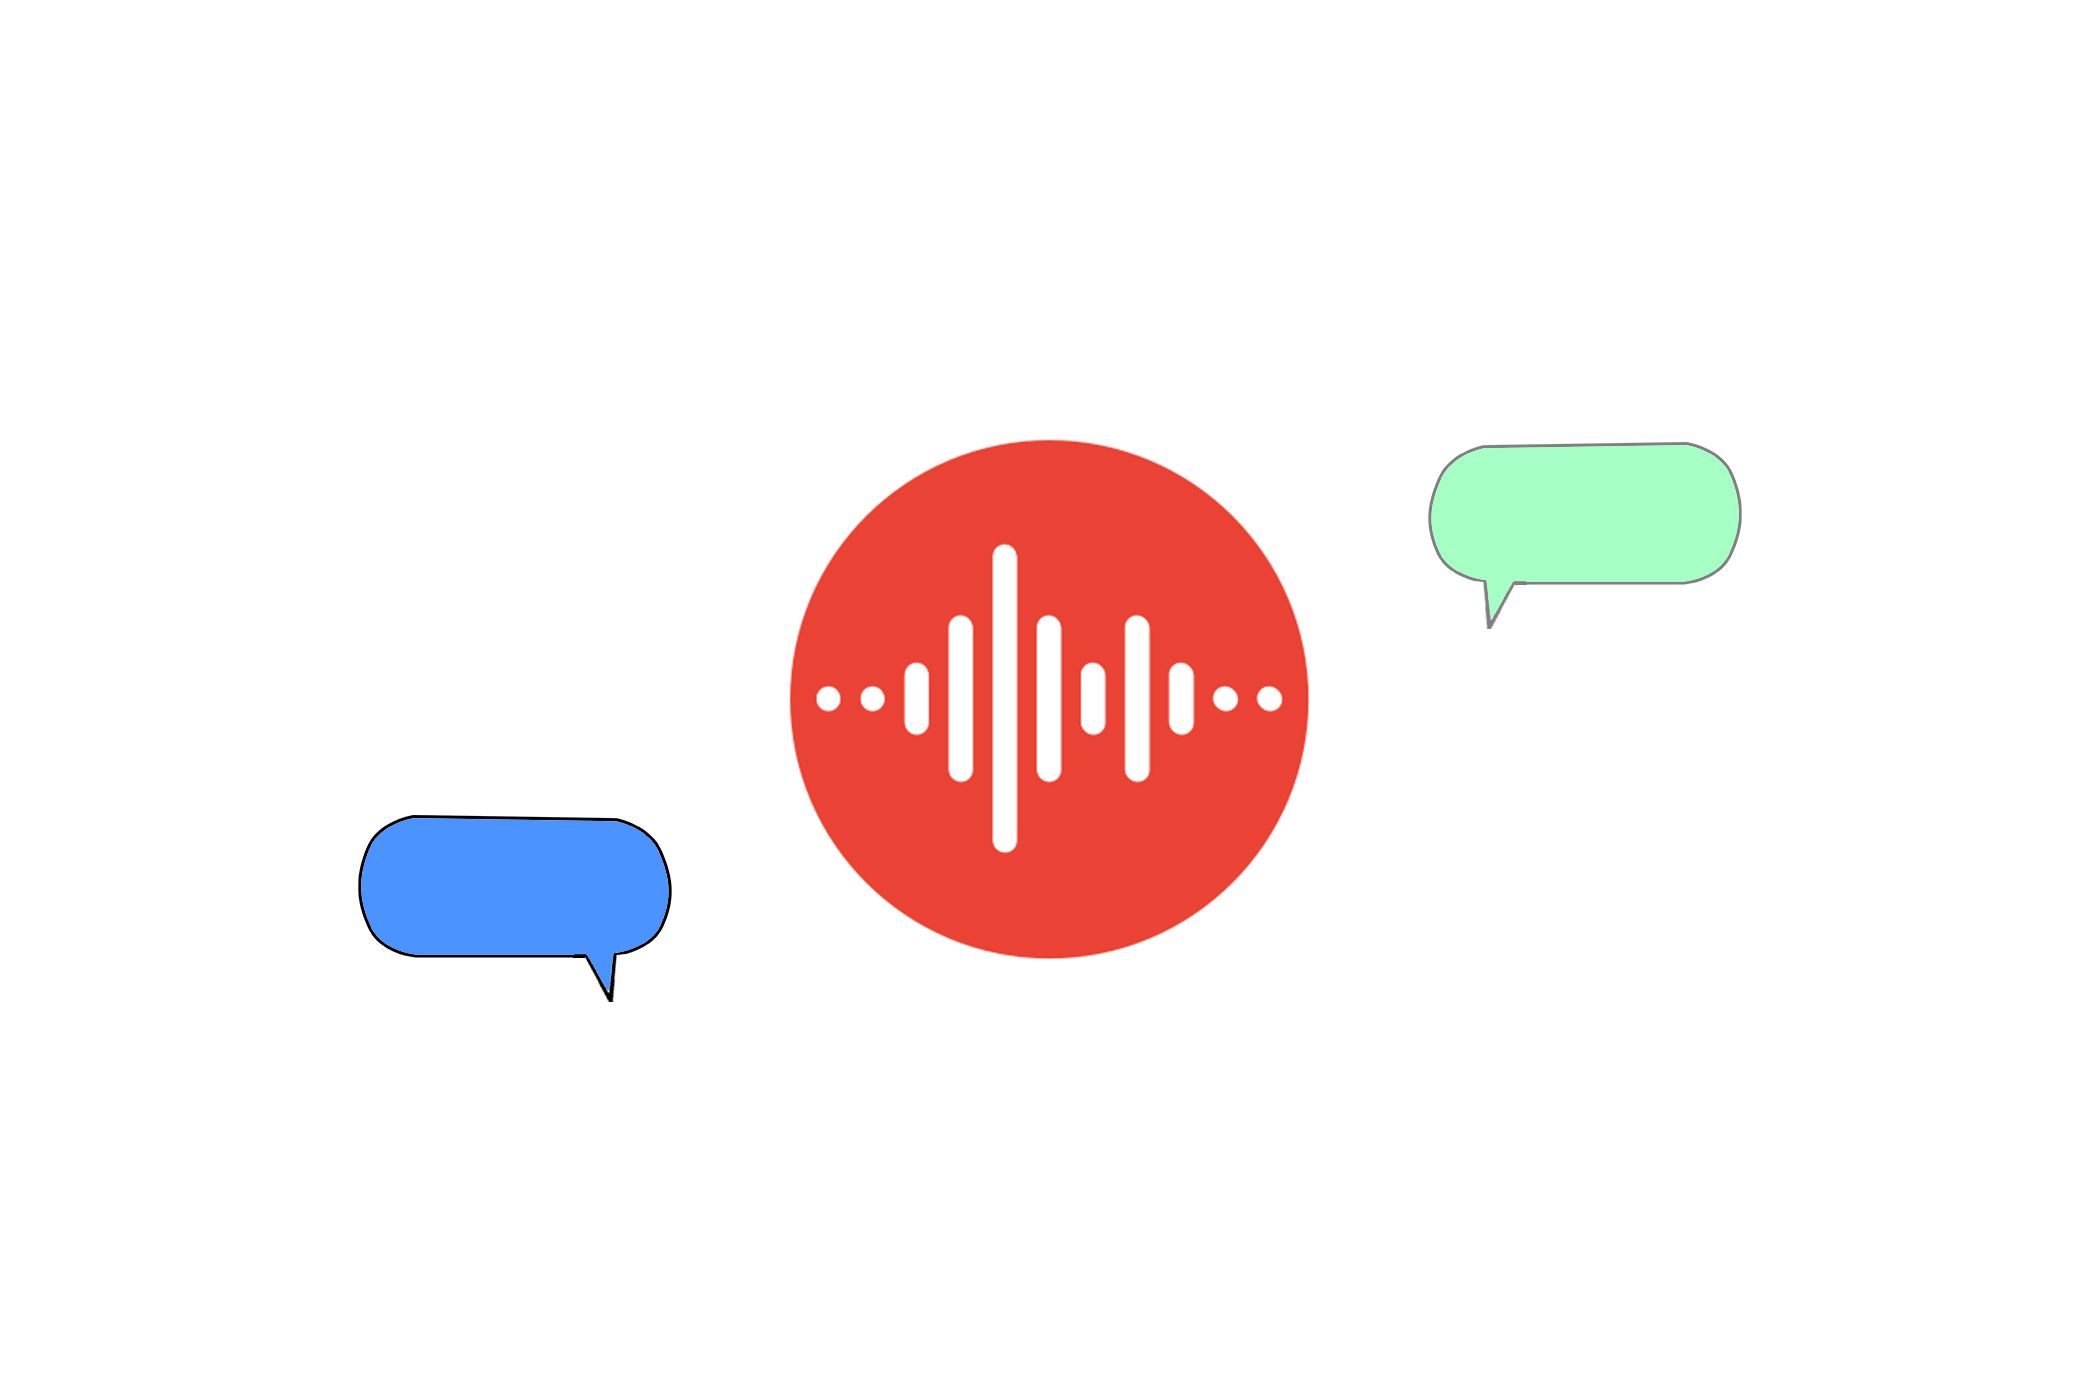 Pixel Recorder icon with two speech bubbles in different colors on white background.